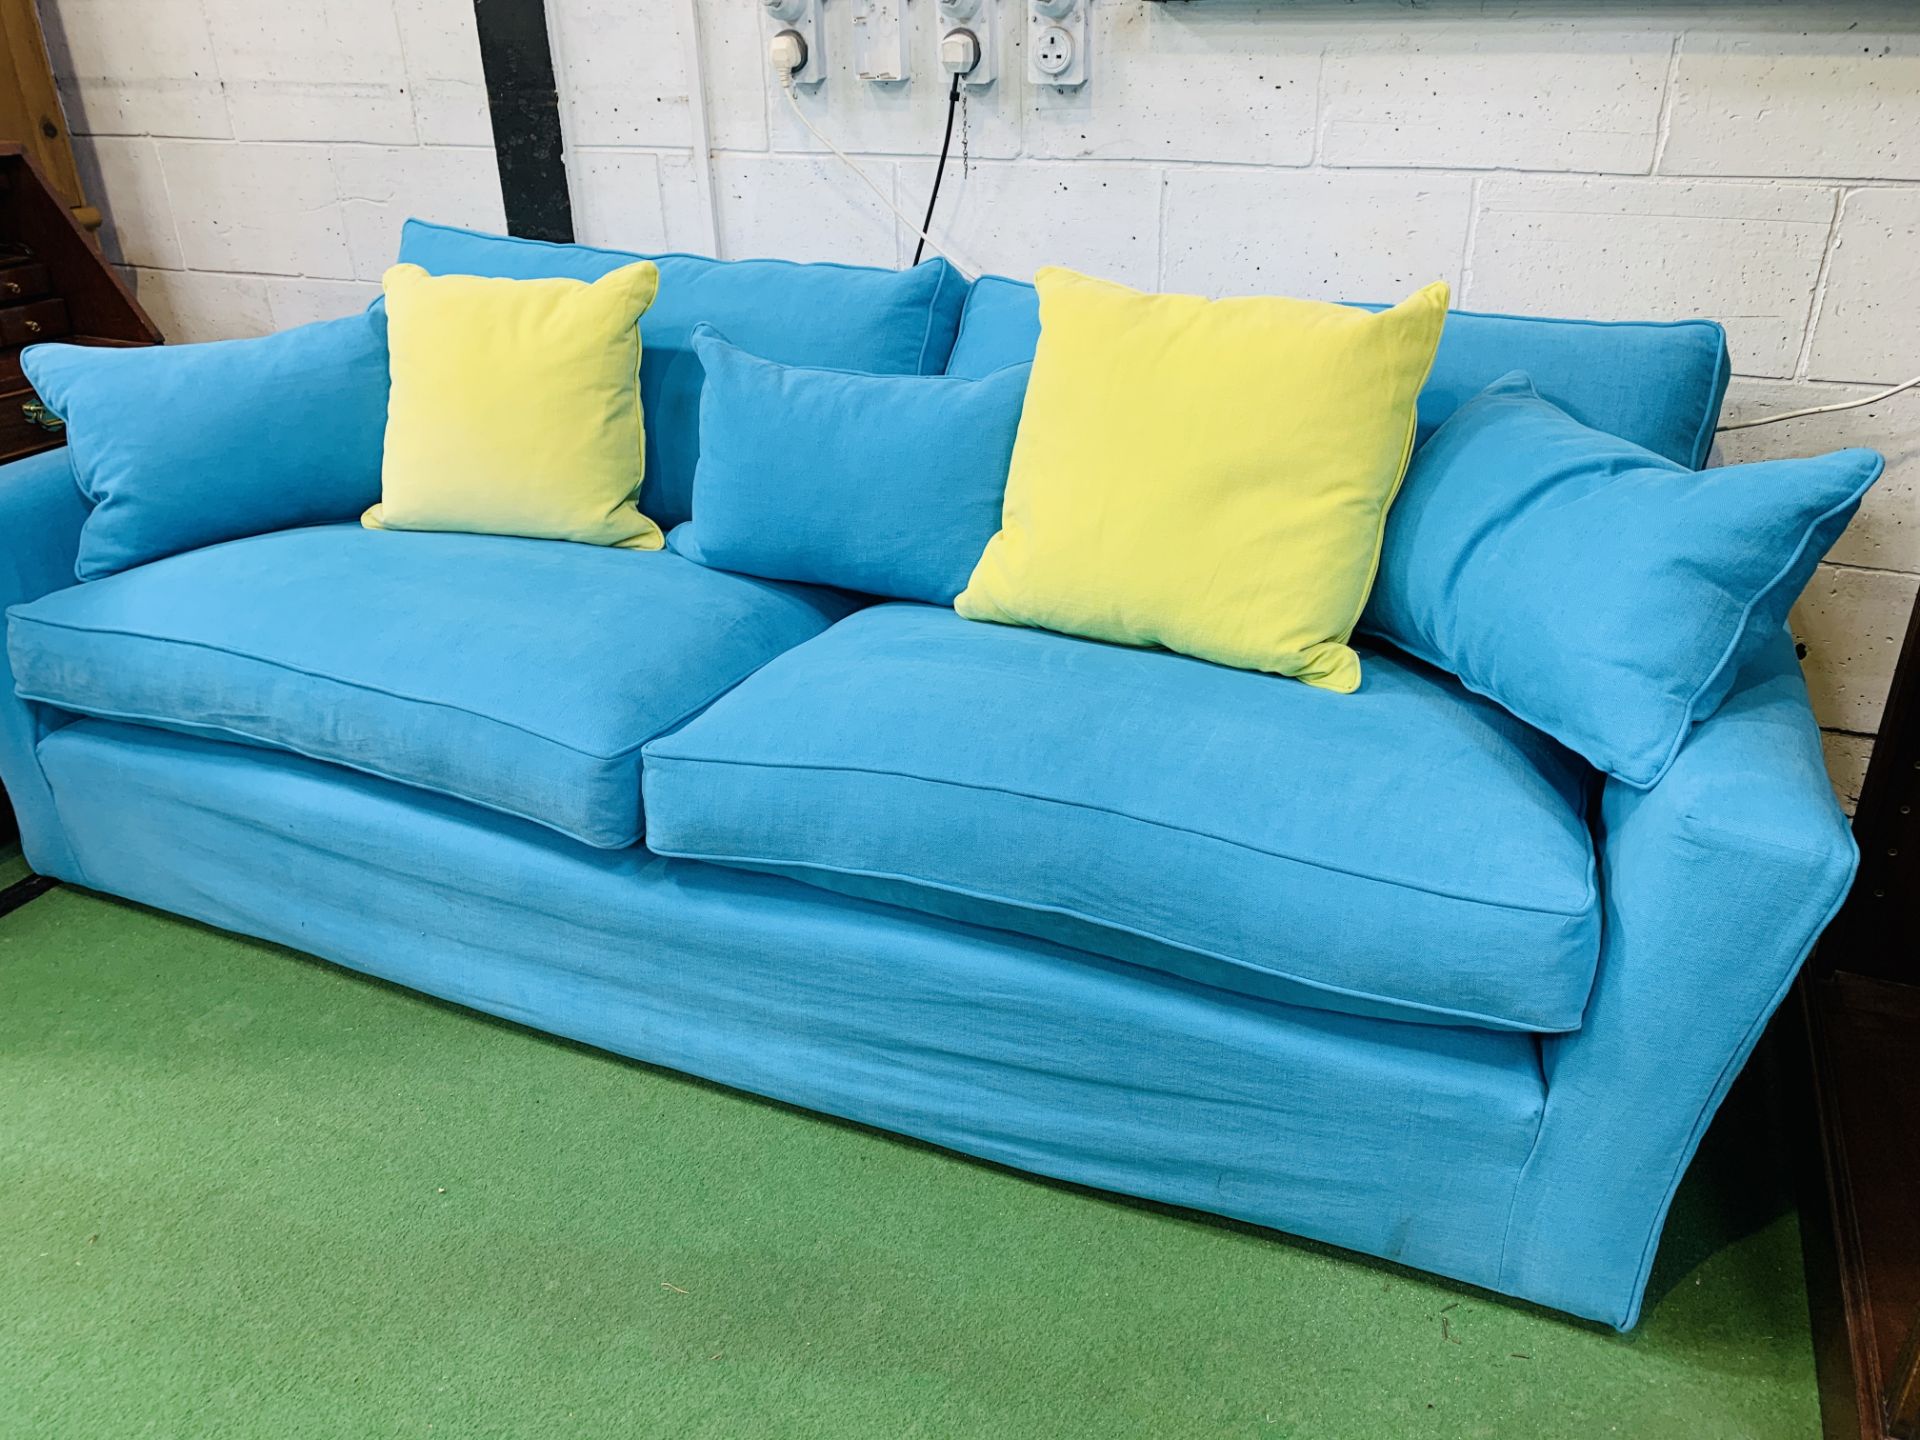 Three seat sofa by "Sofa Workshop" upholstered in turquoise cotton loose covers, with matching cushi - Image 4 of 4